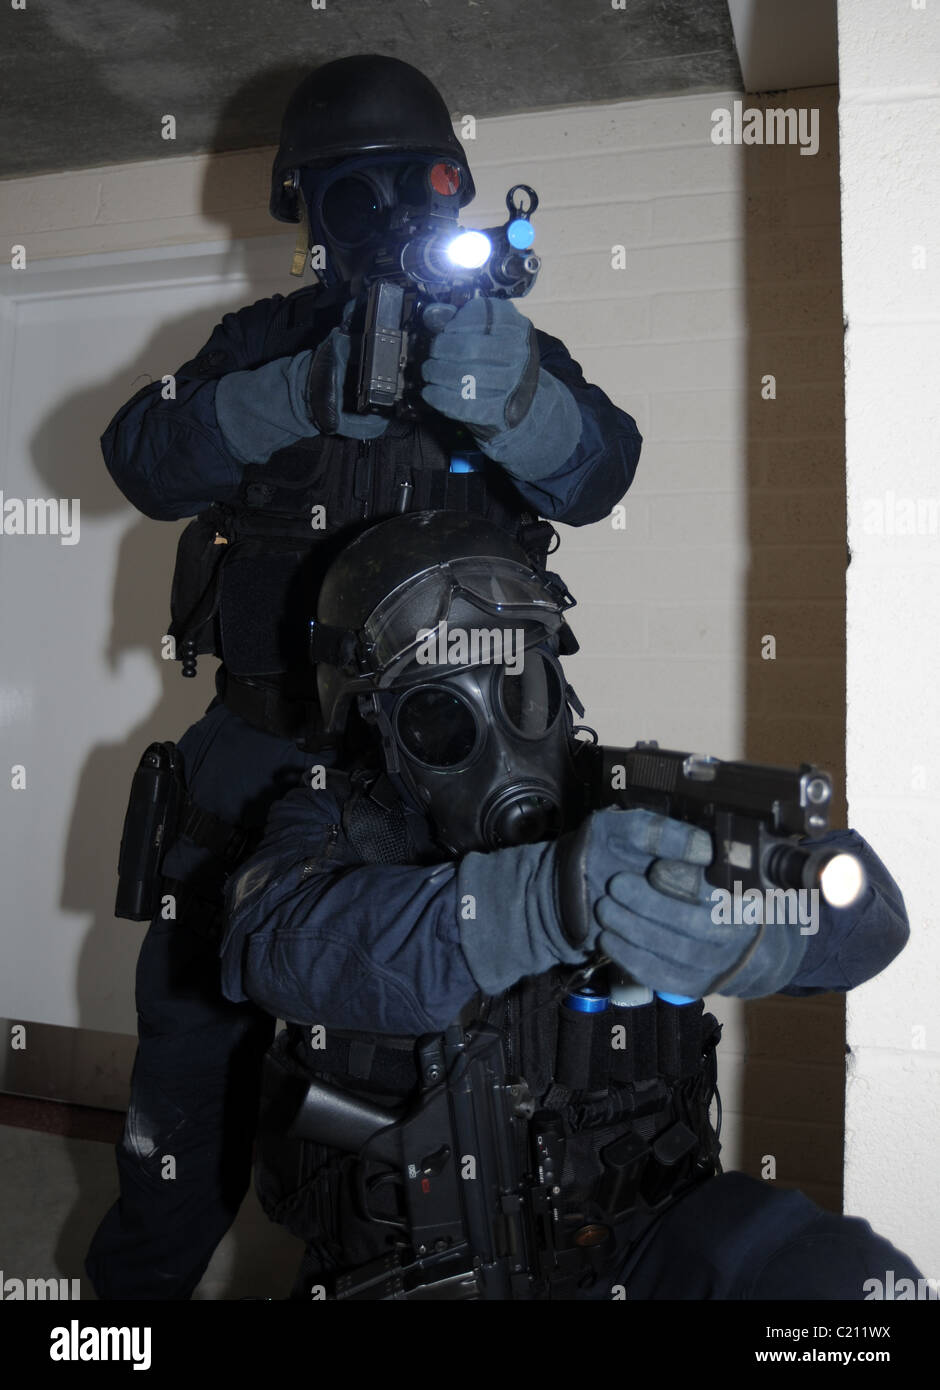 SWAT officers armed with pistols and gas masks. Real police, not a reconstruction Stock Photo